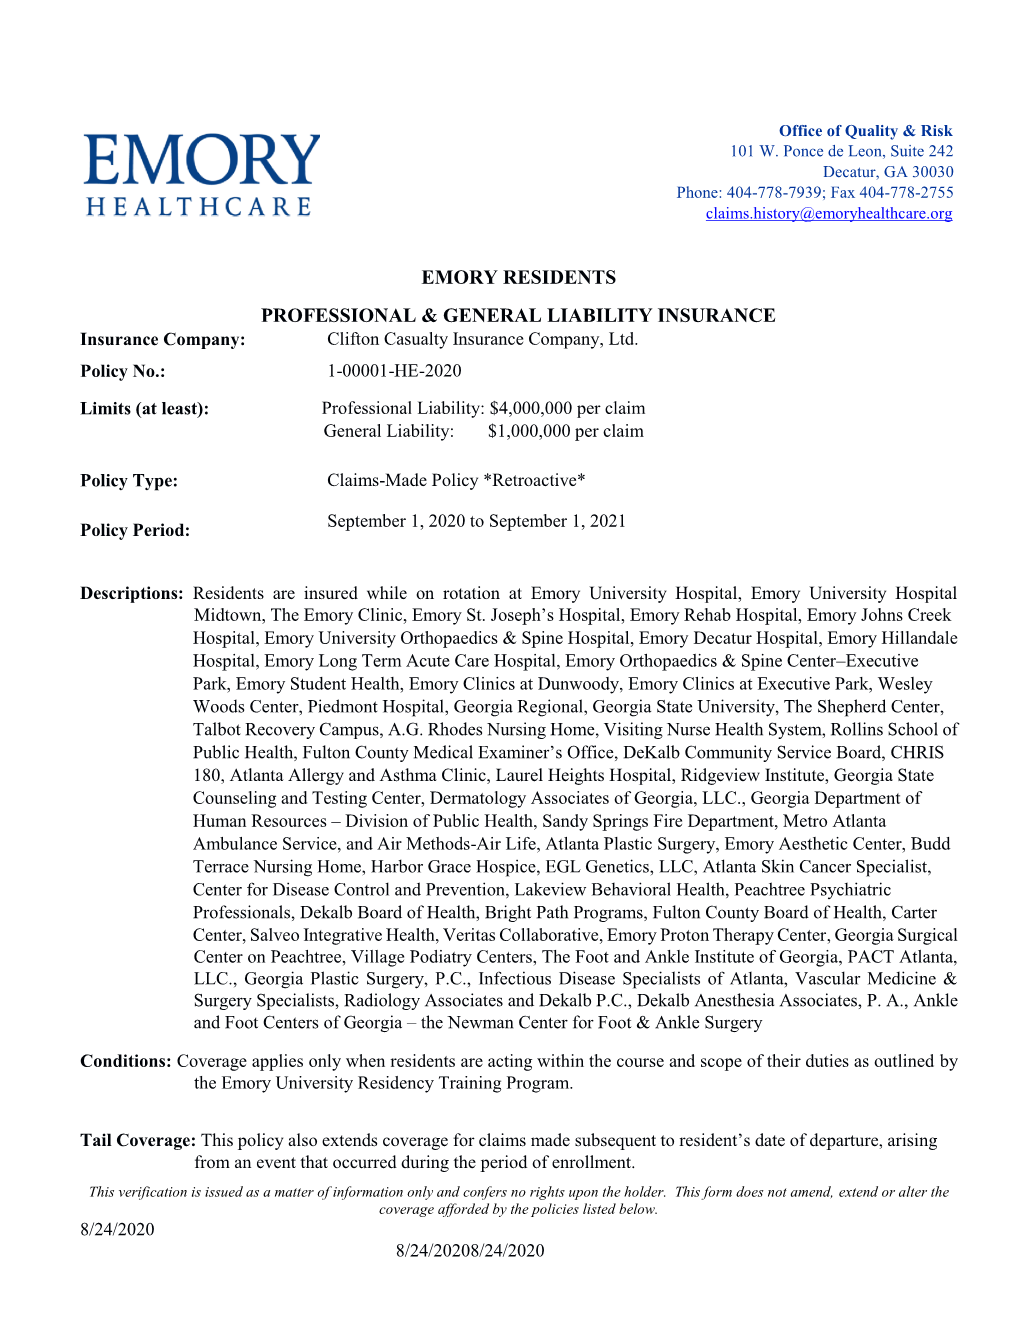 Emory Residents Professional & General